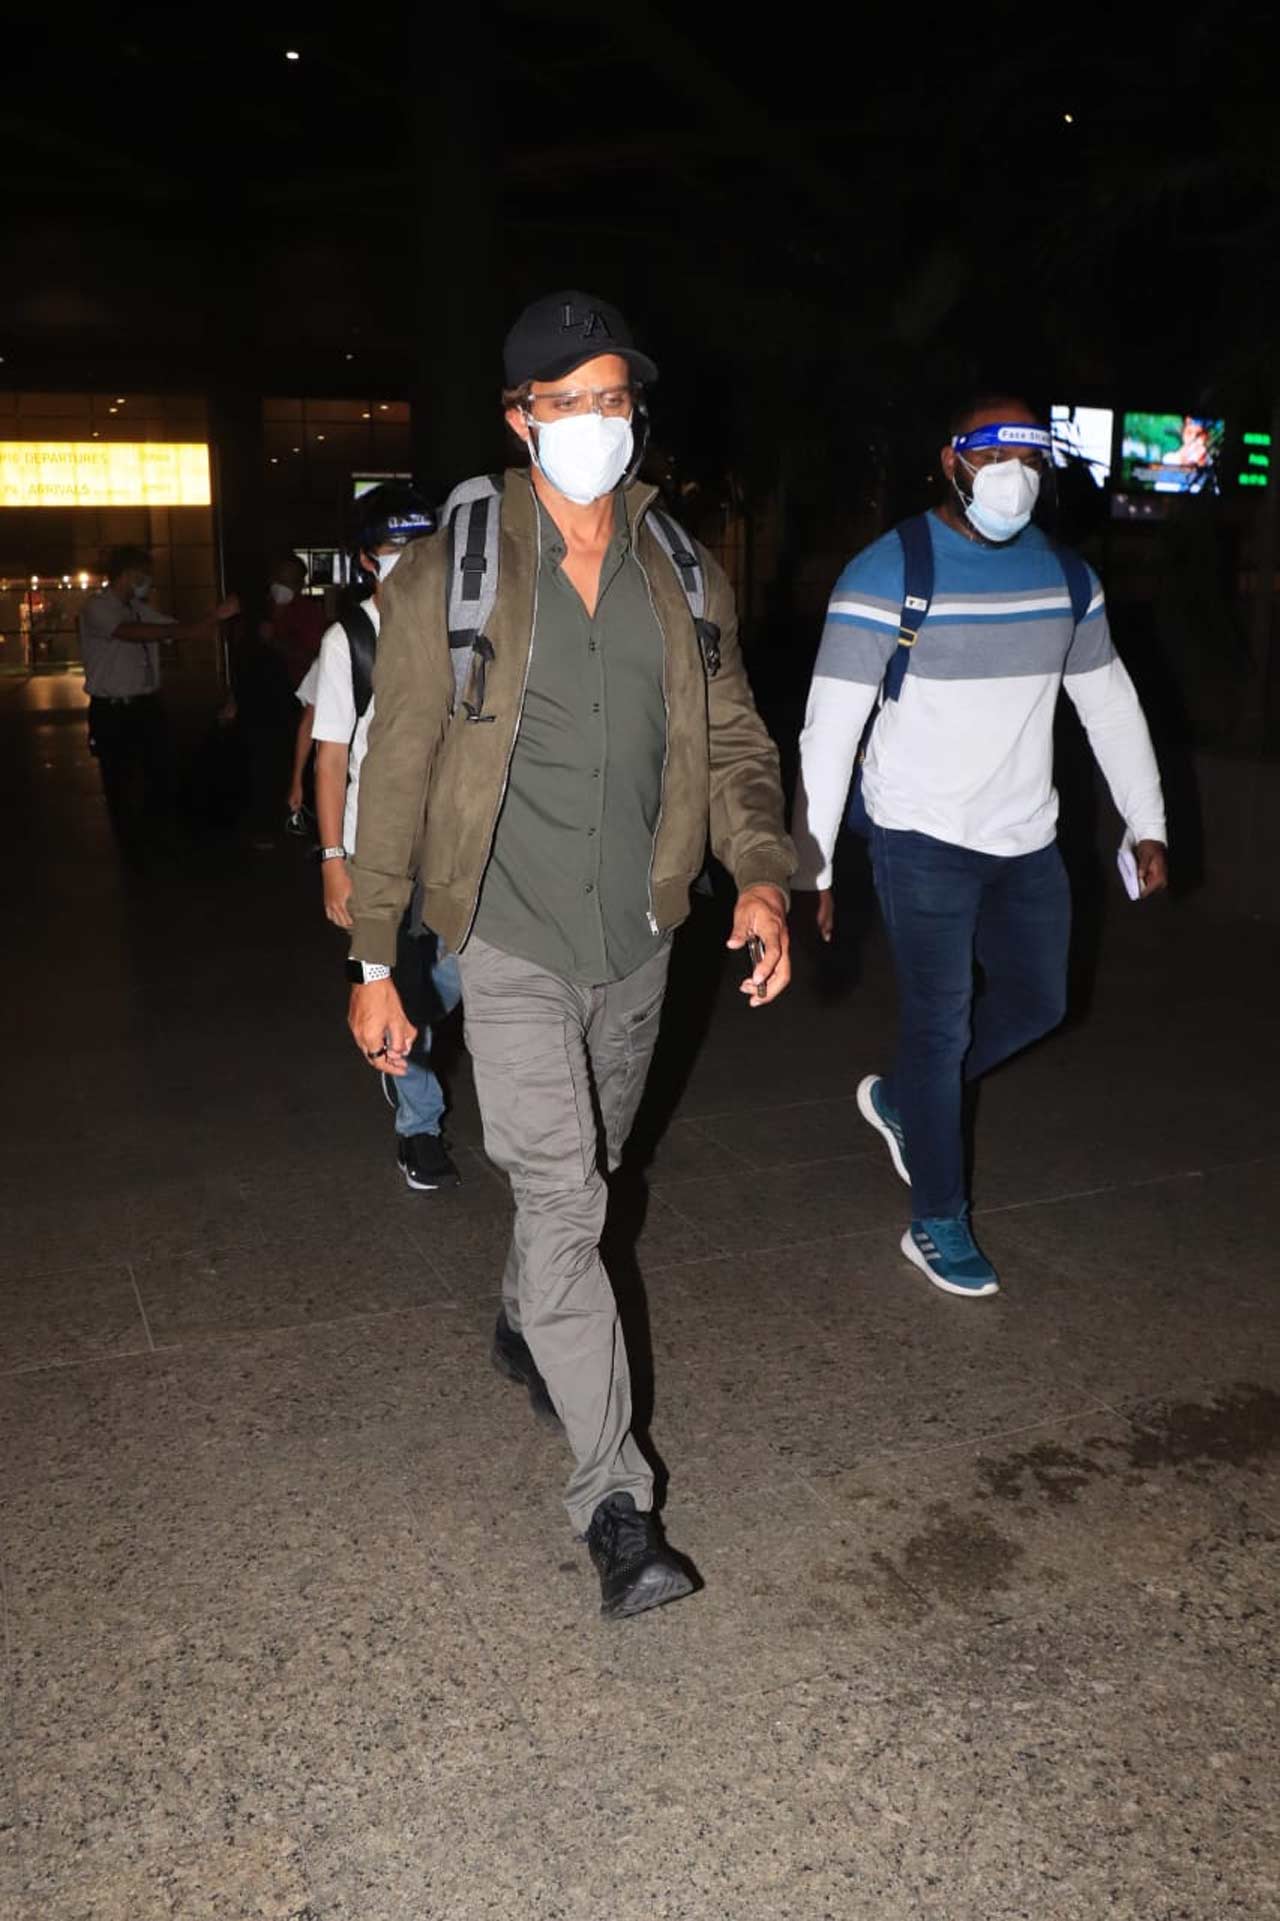 Hrithik Roshan, the Krrish actor, was also clicked at the Mumbai airport. Speaking about their work fronts, Hrithik would be next seen in 'Fighter' with superstar Deepika Padukone, while the buzz is strong for 'Krrish 4' as well.